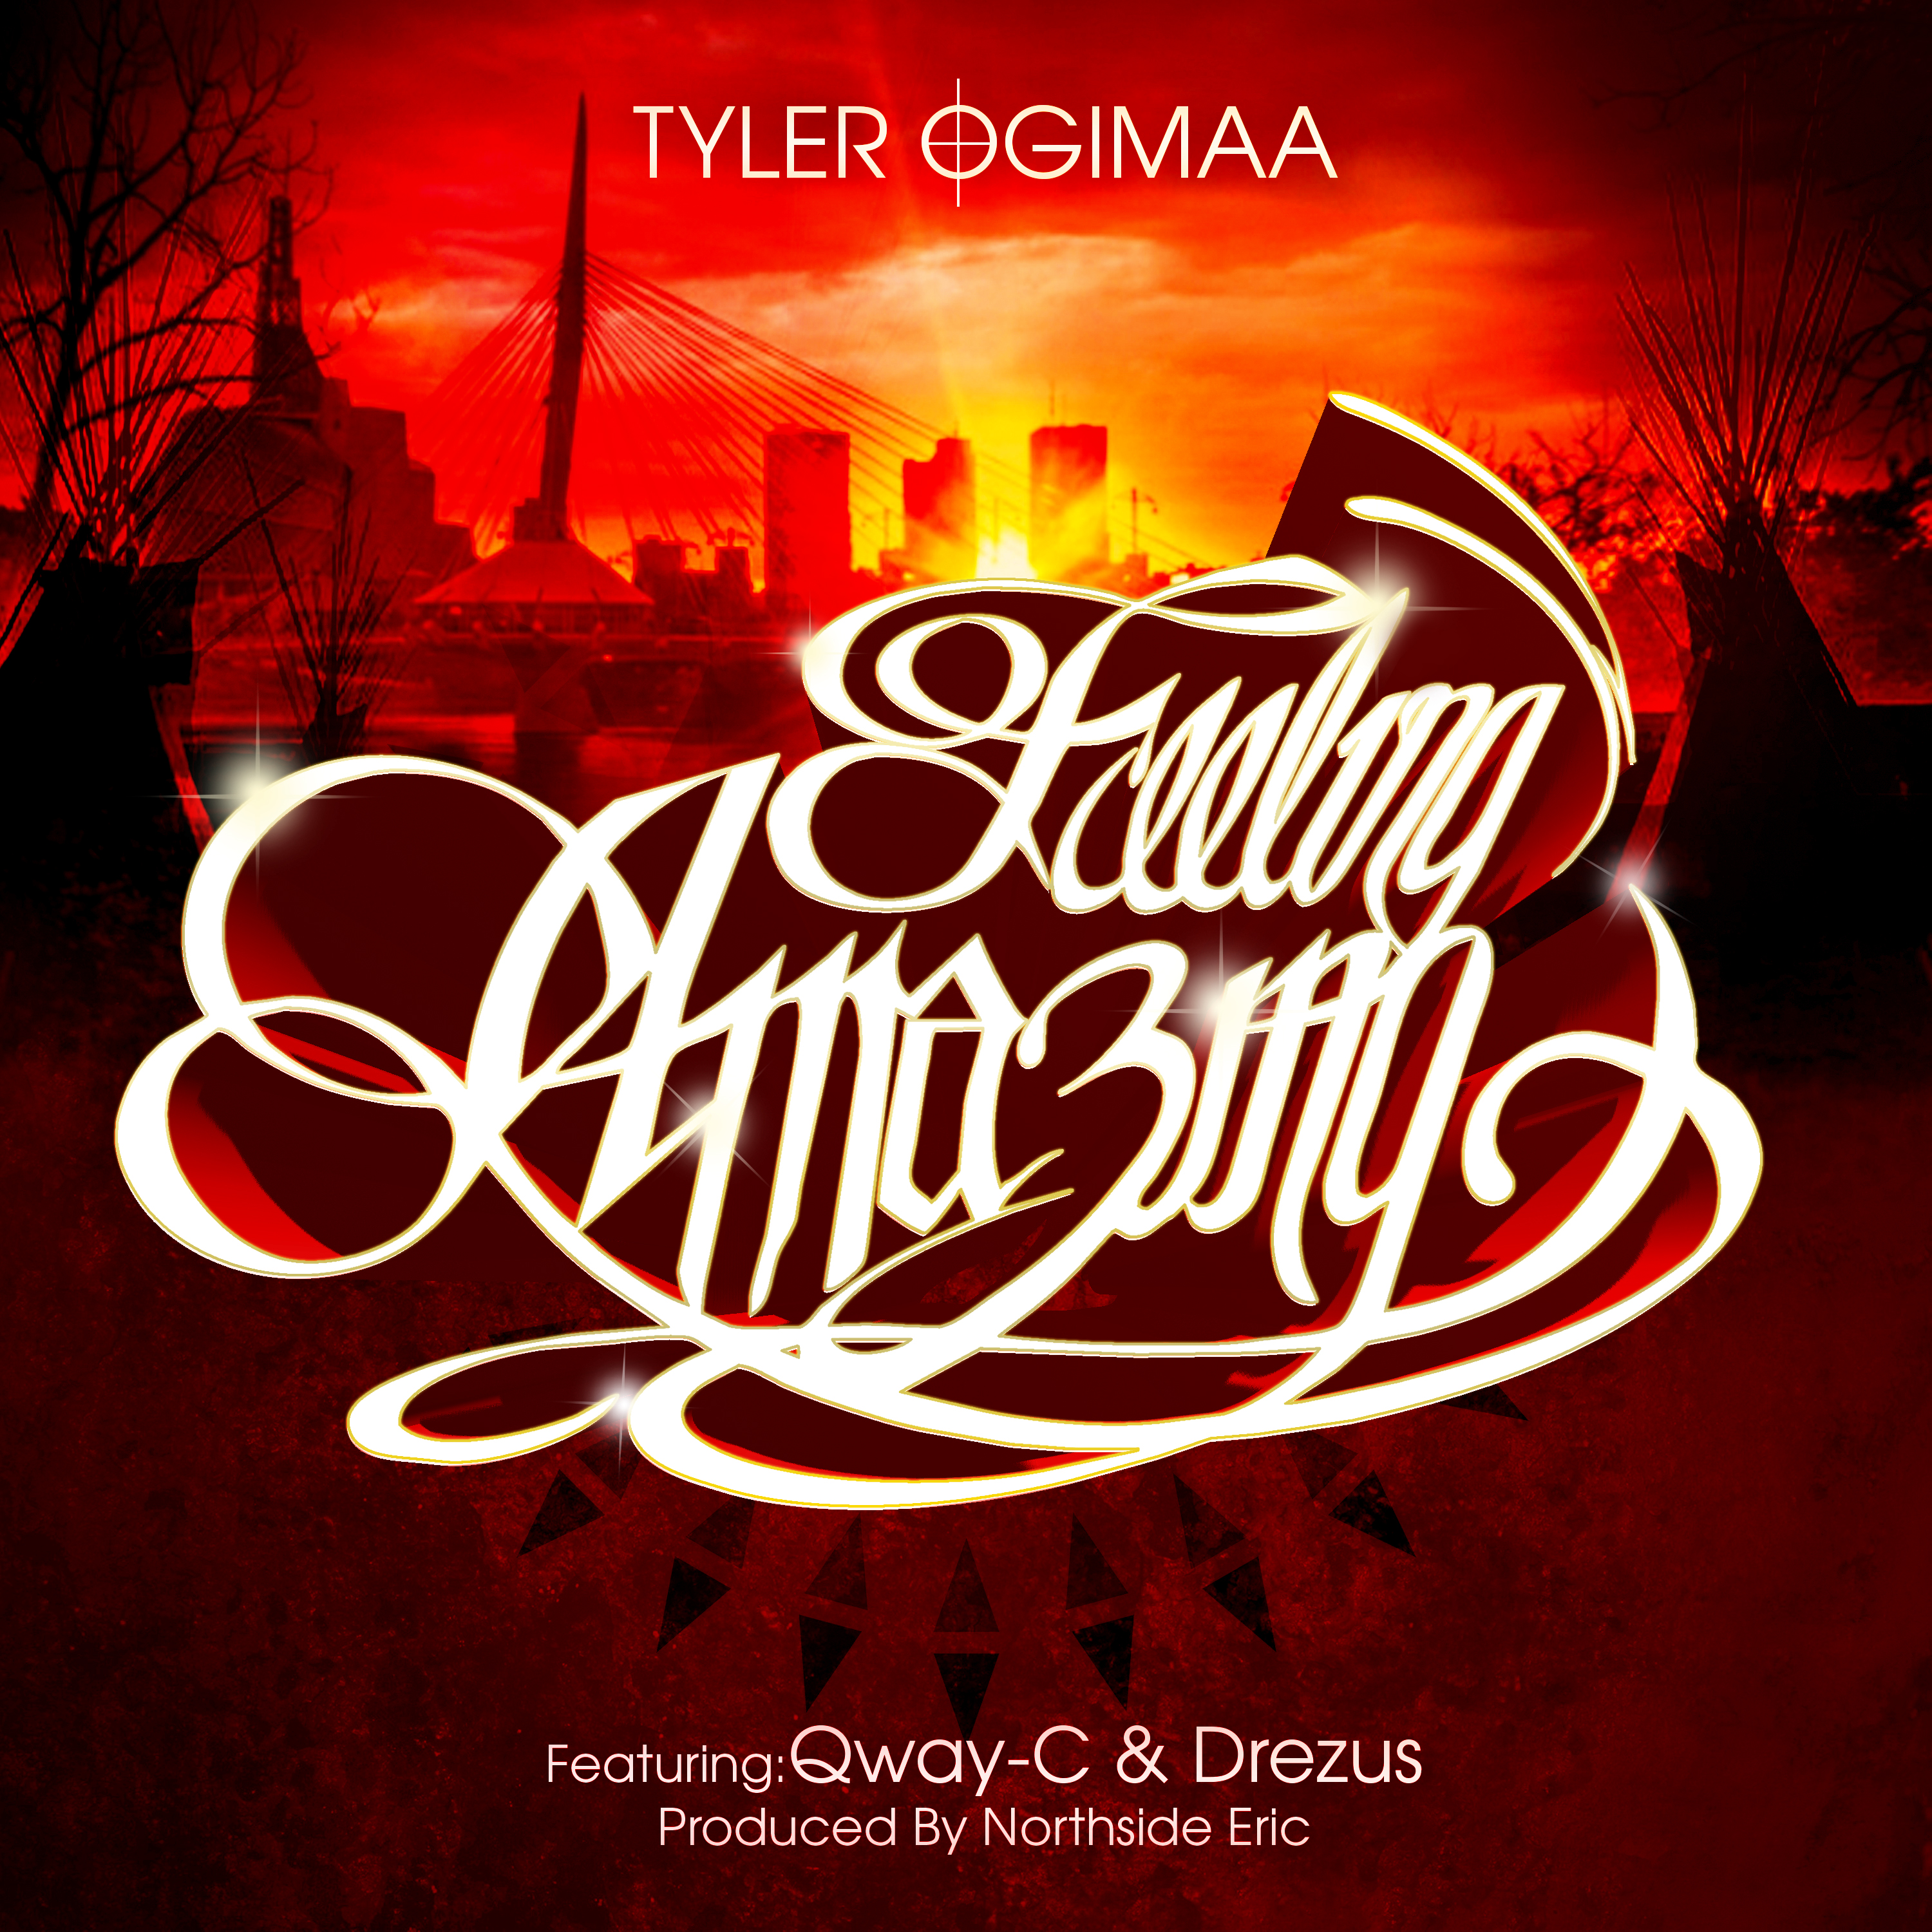 Art for FEELING AMAZING (feat. Qway-C & Drezus) by Tyler Ogimaa